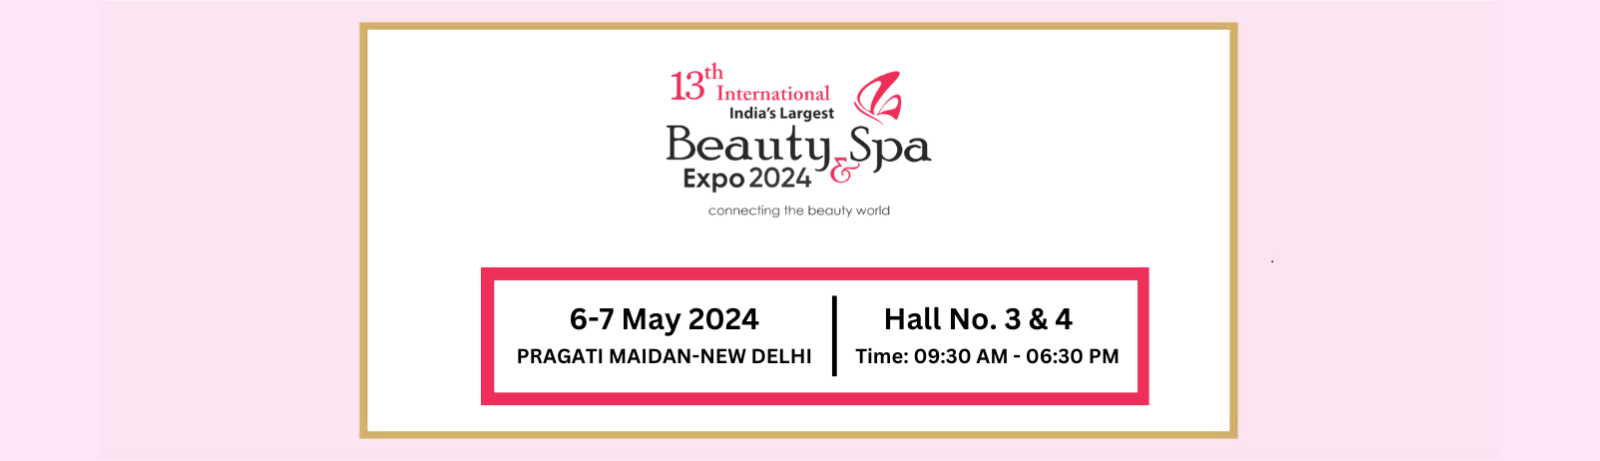 Beauty Trade Show in India